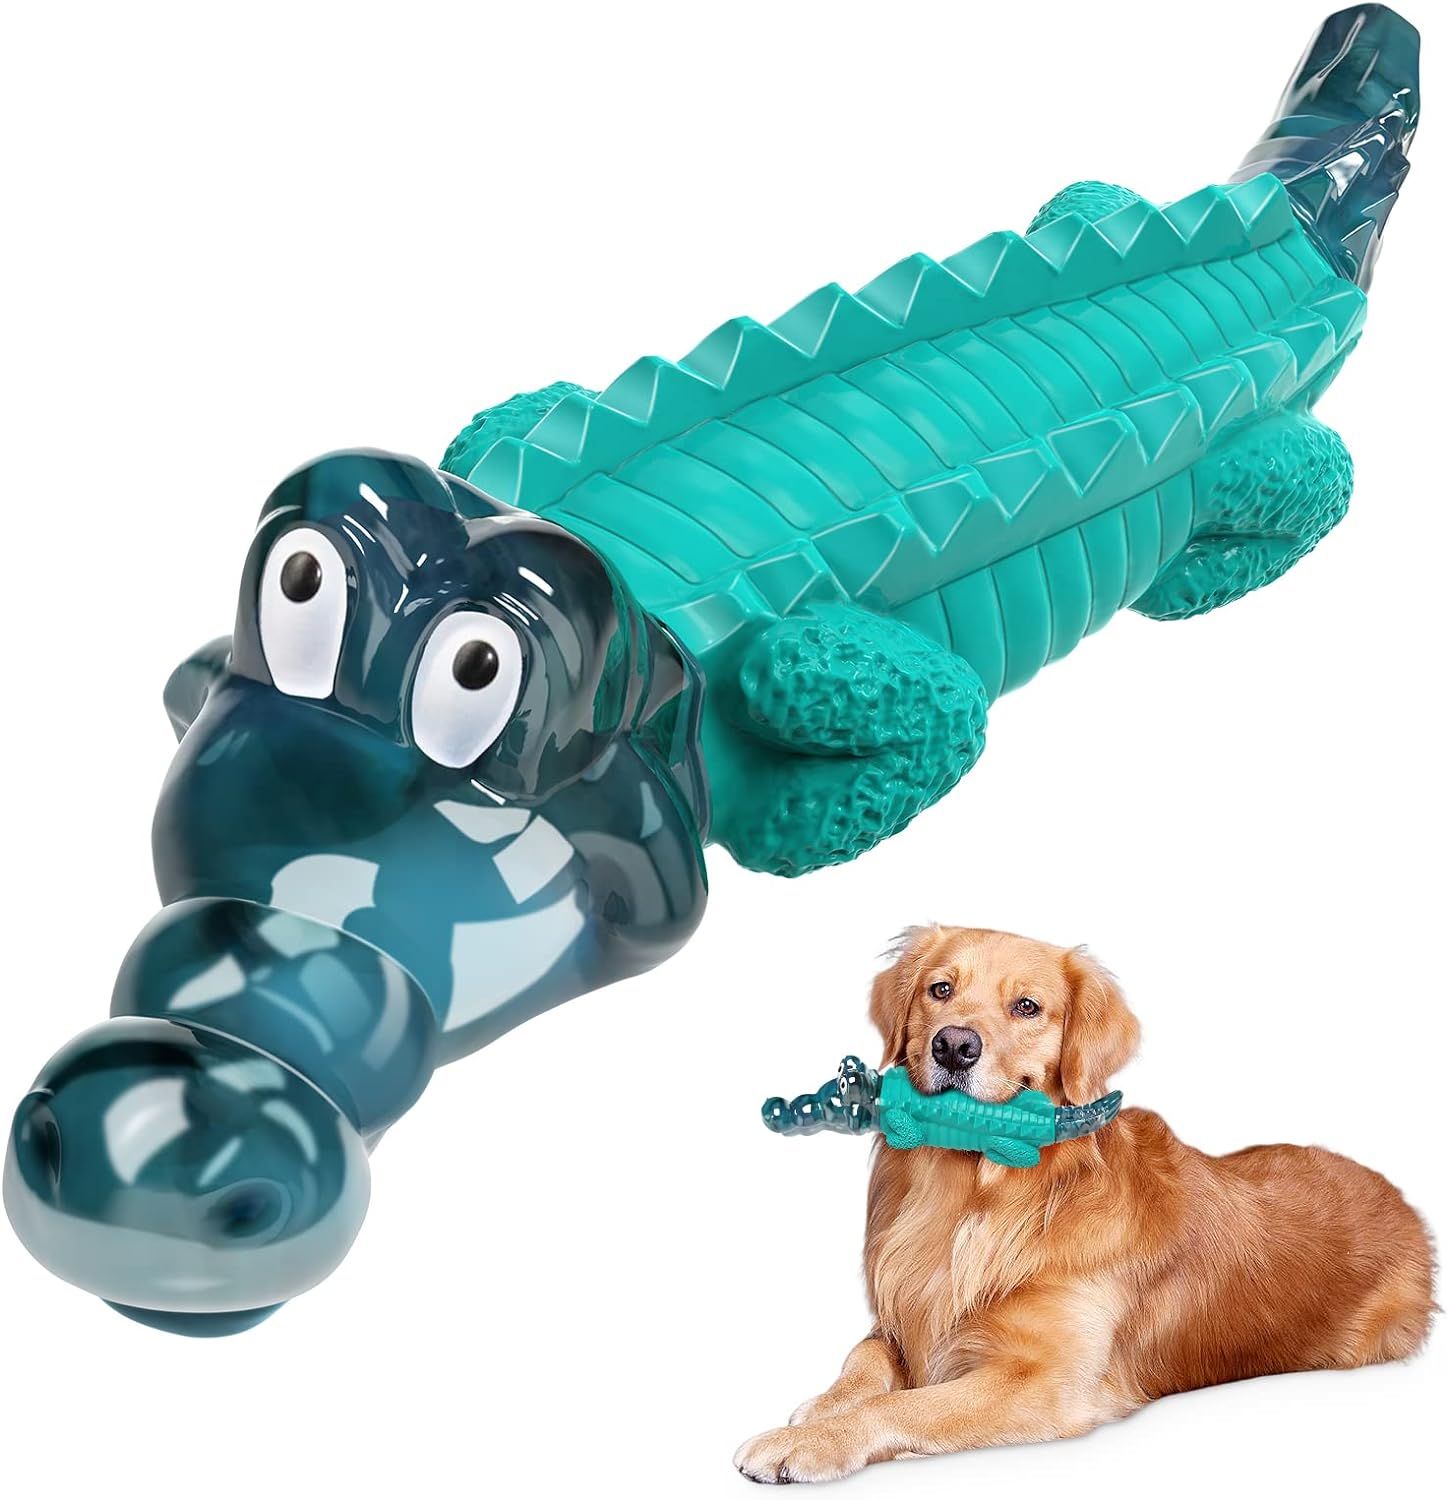 Dog Toys for Aggressive Chewers: Dog Chew Toy/Large Dog Toys/Tough Dog Toys/Heavy Duty Dog Toys/Durable Dog Toys for Large Breeds Dogs/Super Chewer Dog Toys to Keep Them Busy (Blue)